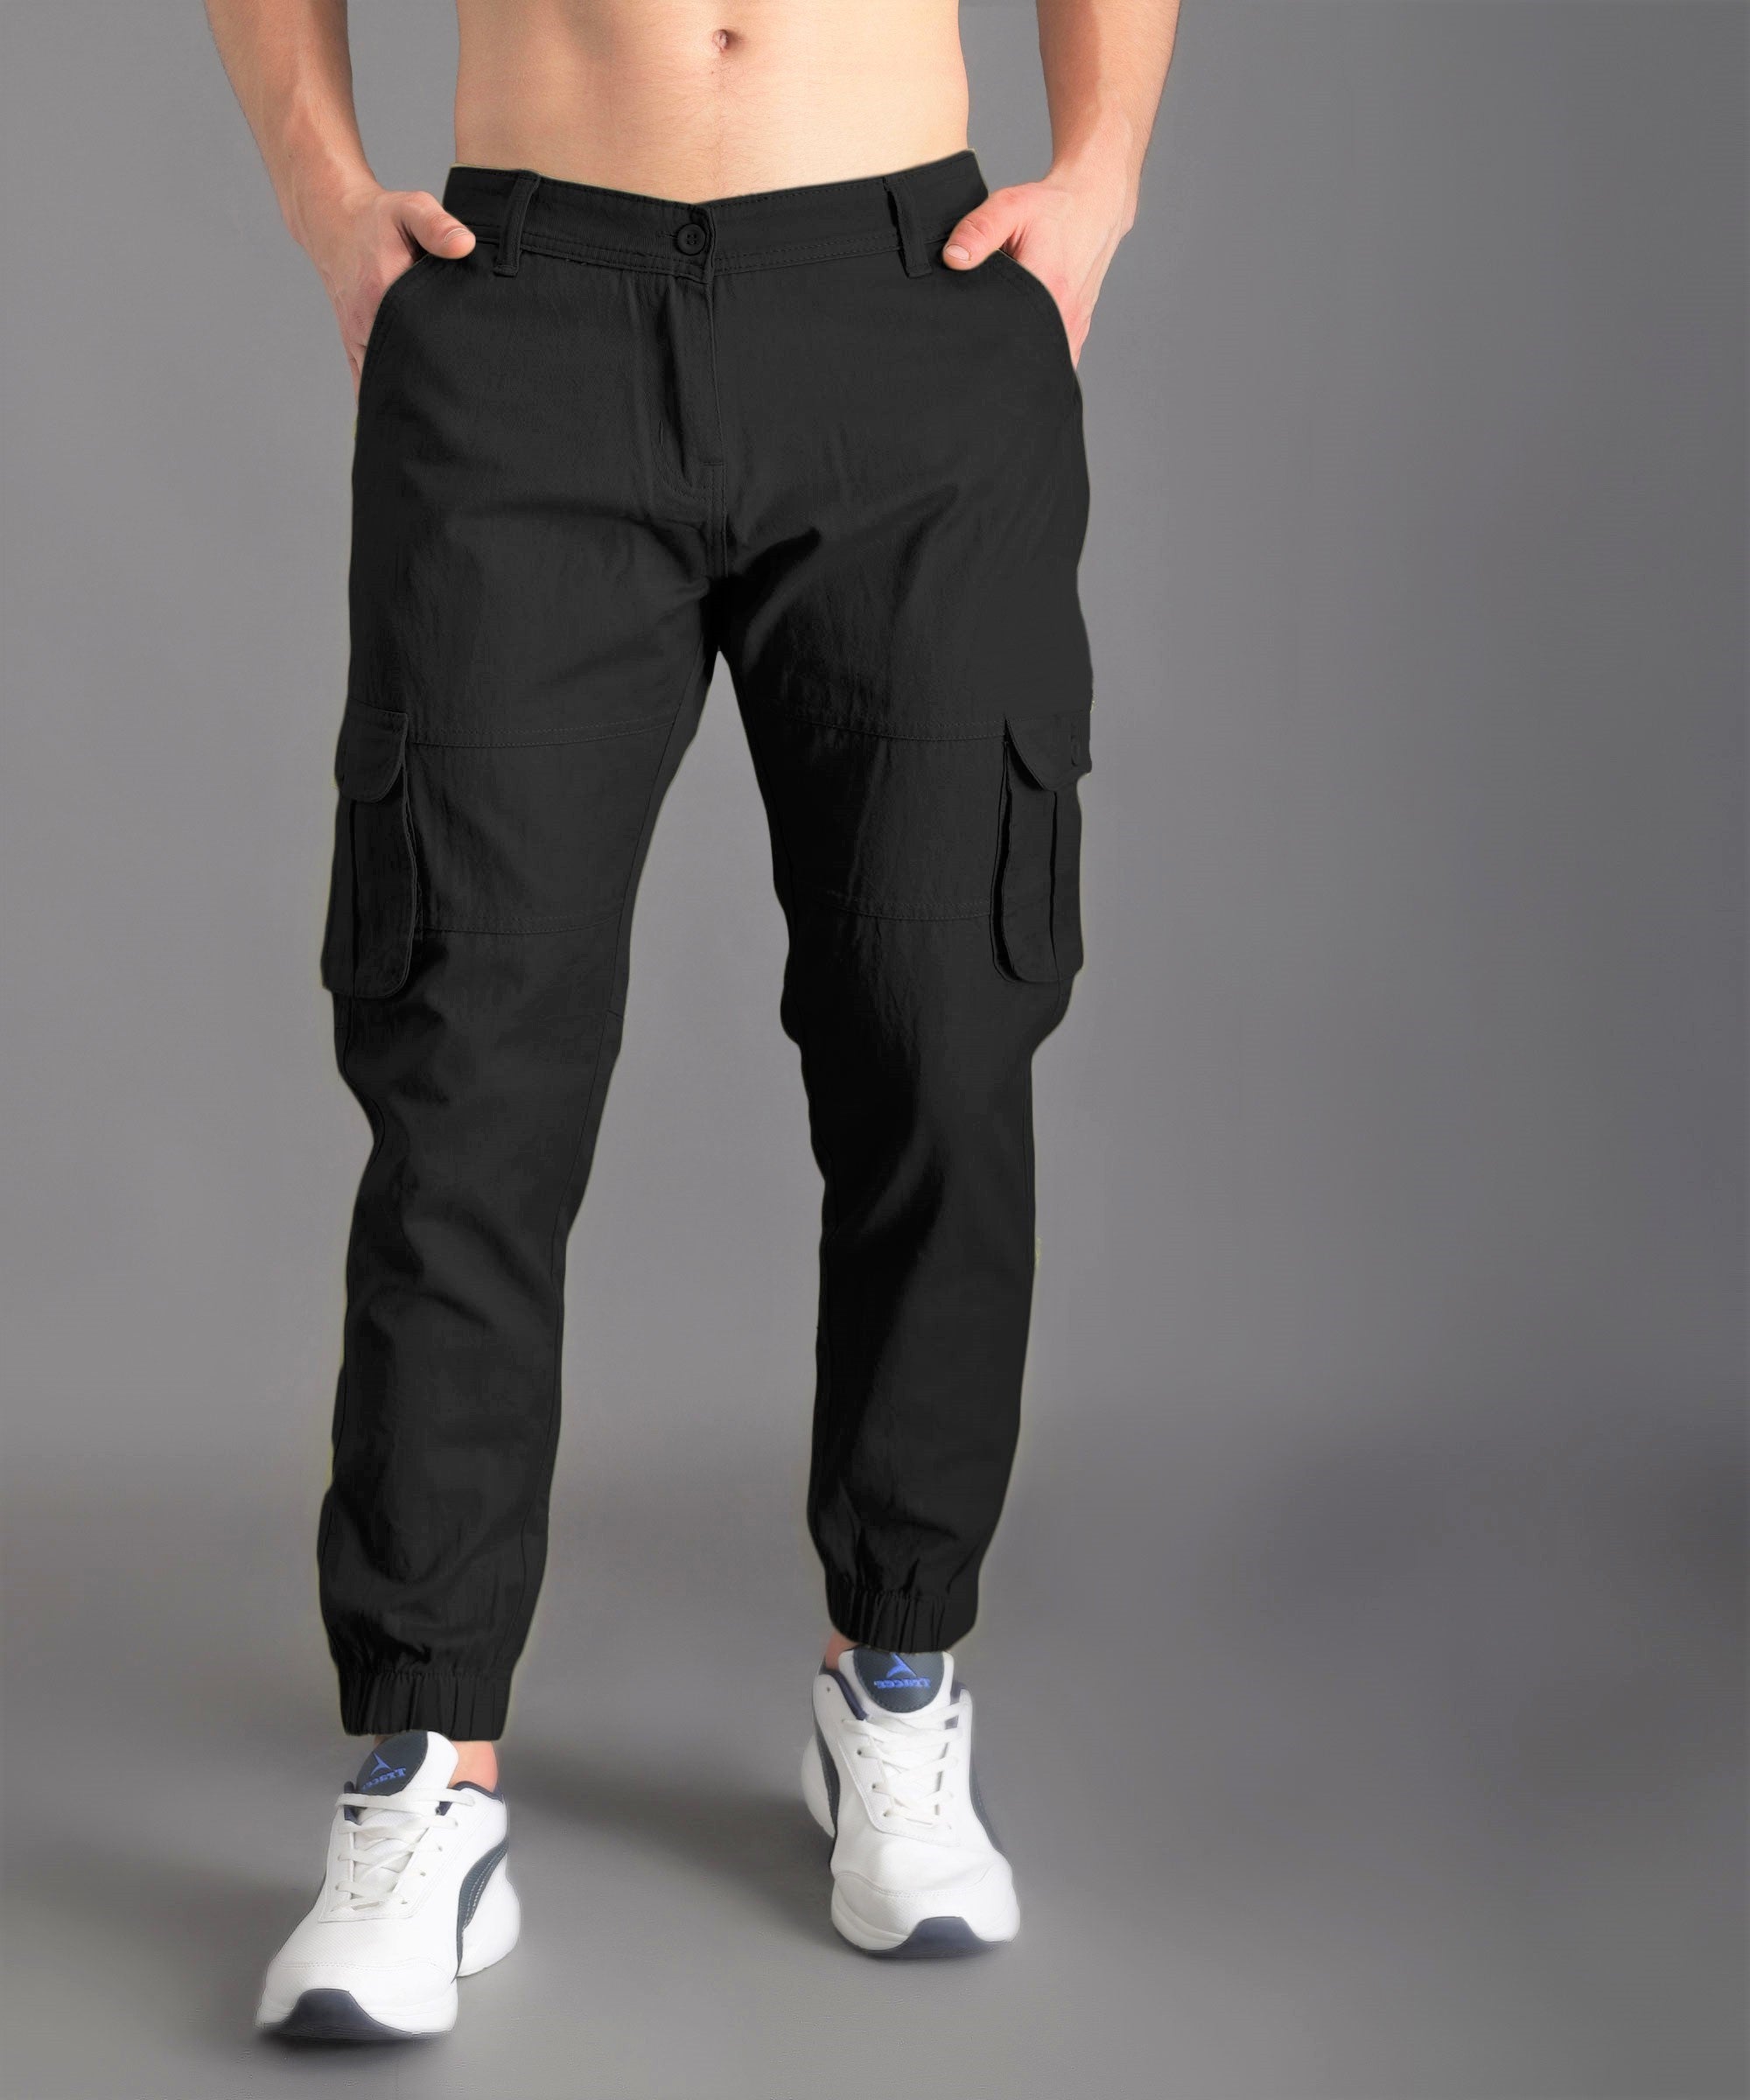 Black Cargo Pant for Boys and Men with Double Pocket